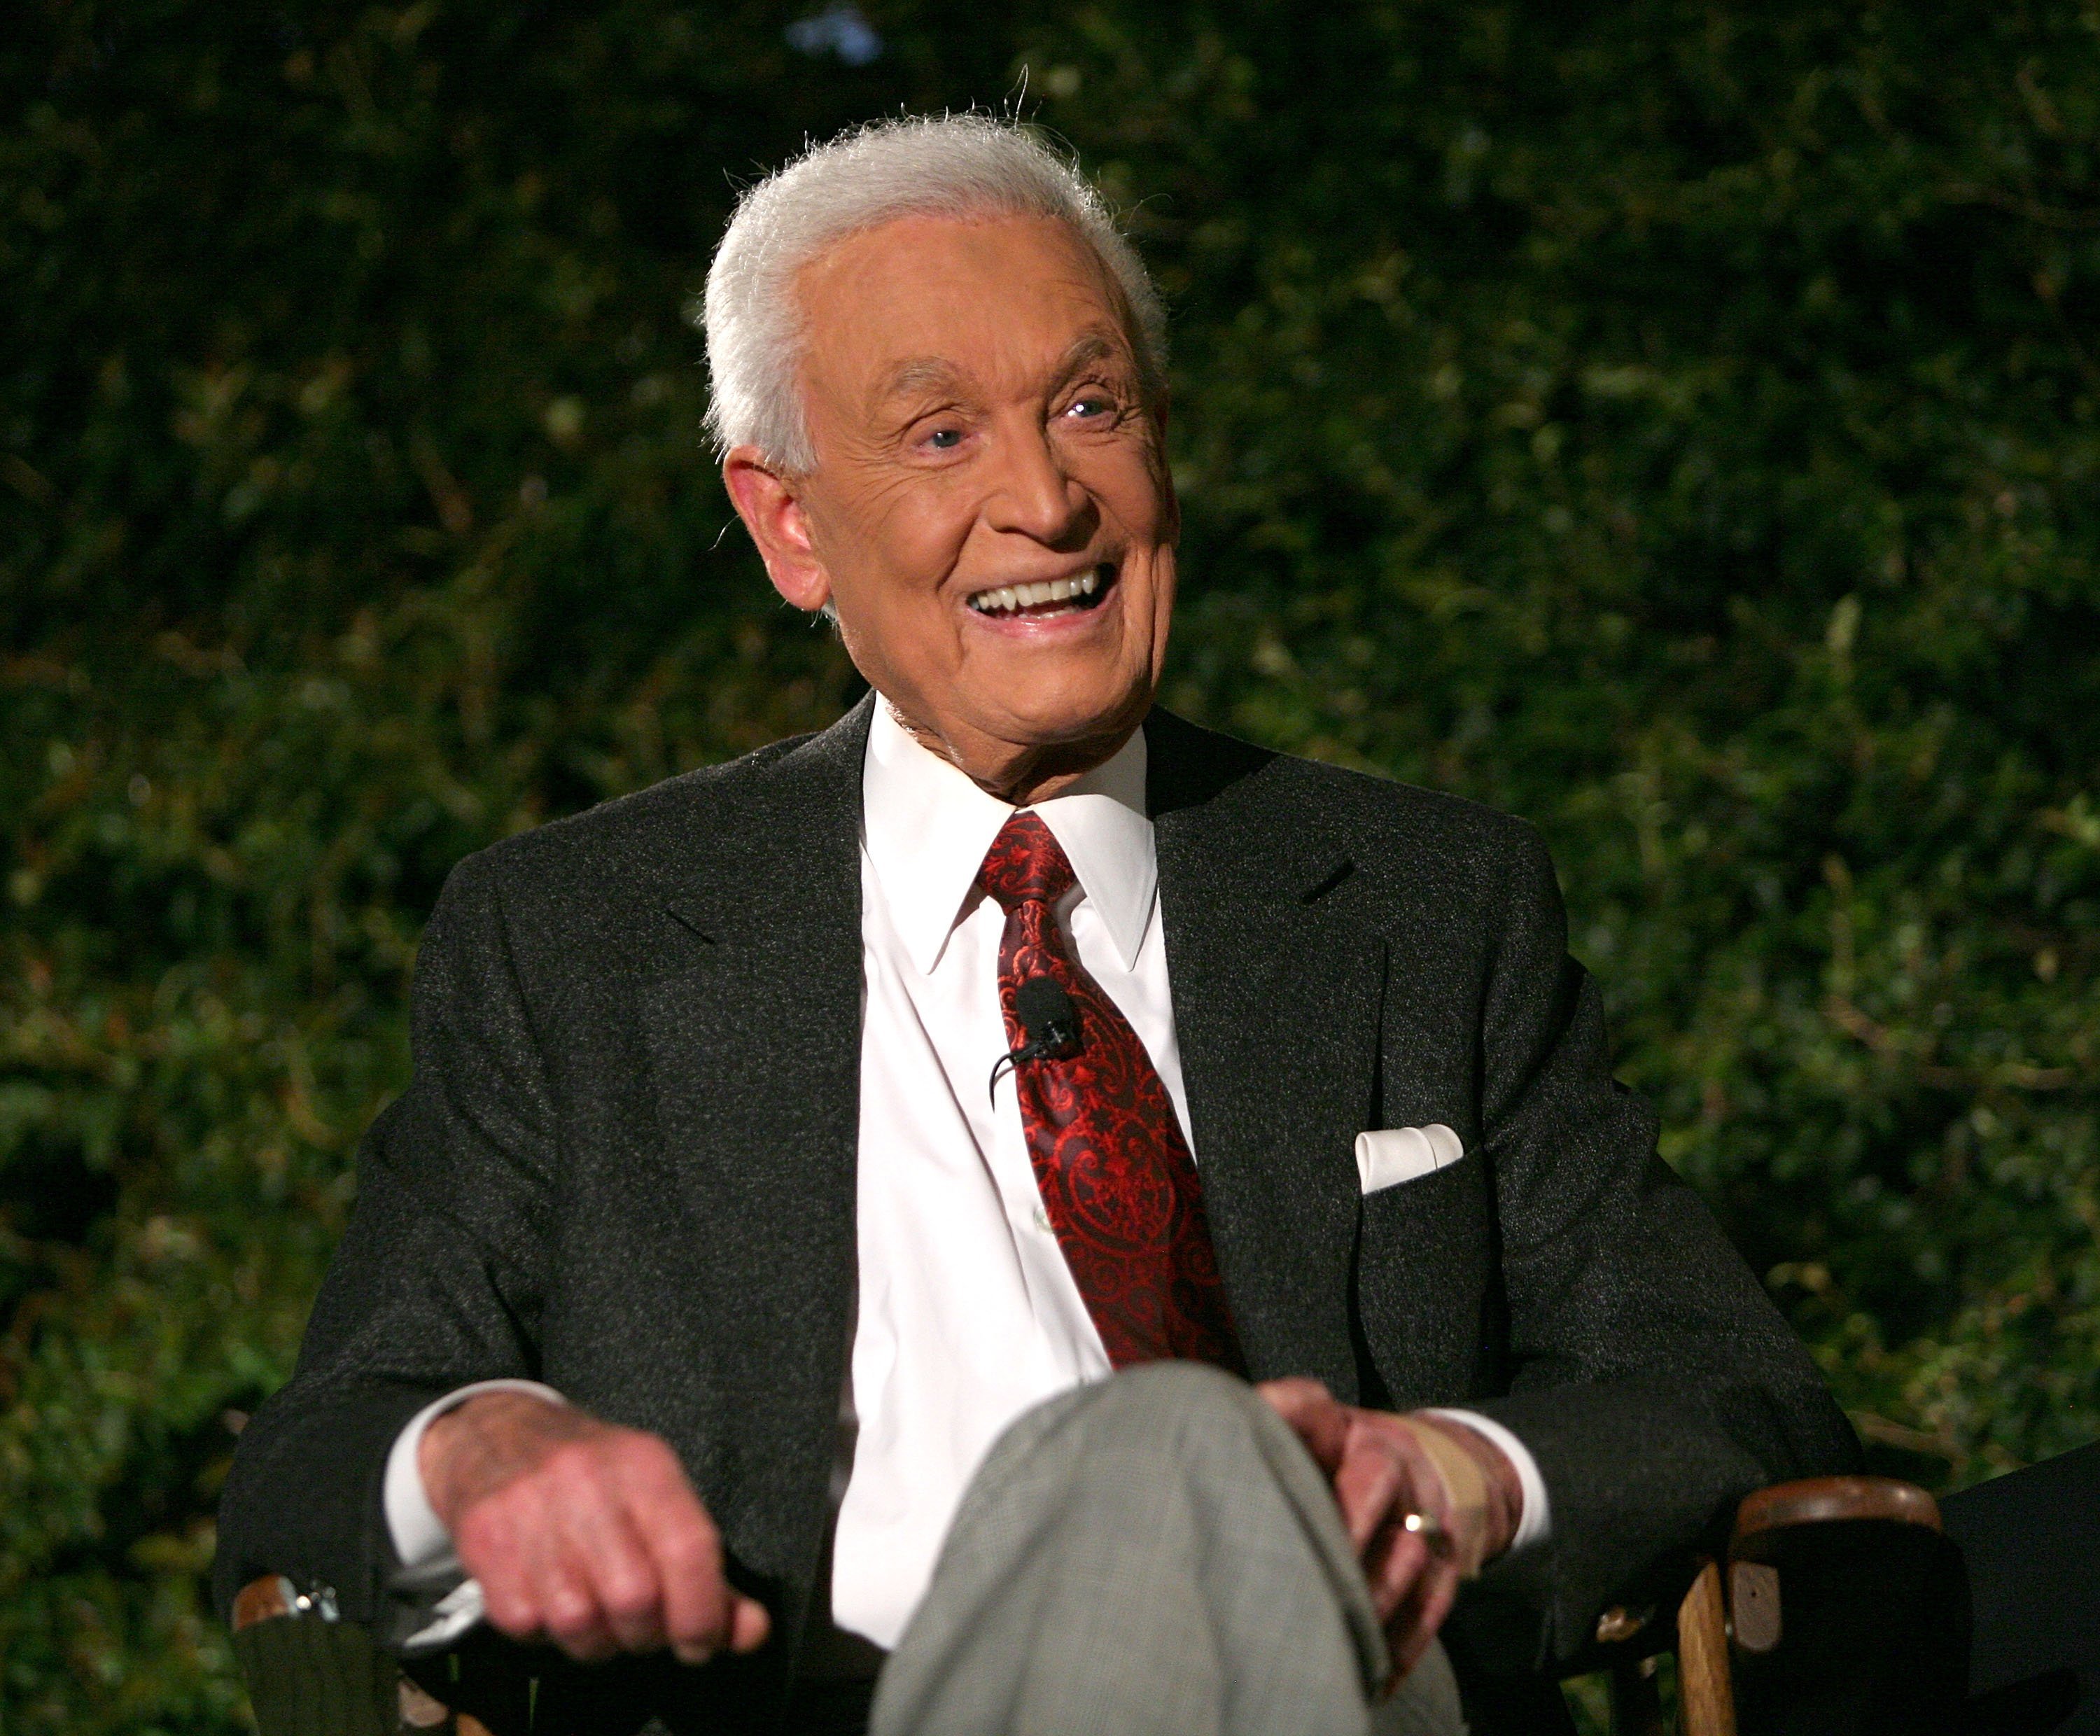 Bob Barker attends An Evening With Bob Barker presented by the Academy of Television Arts and Sciences at The Leonard Goldenson Theater May 7, 2007 | Source: Getty Images